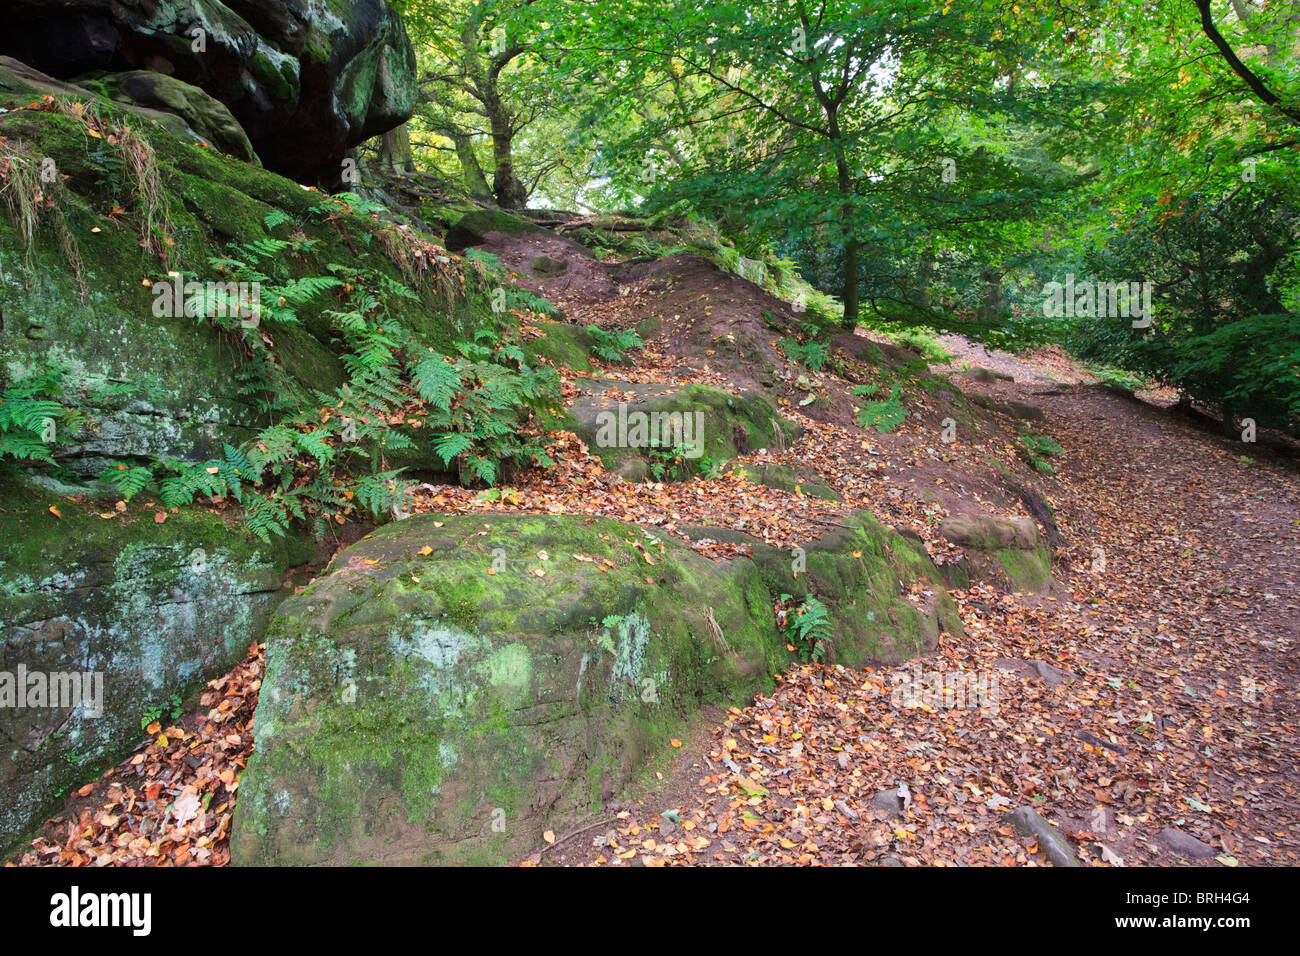 Path through wooded area below alderley edge in cheshire, the path strewn with fallen brown leaves Stock Photo